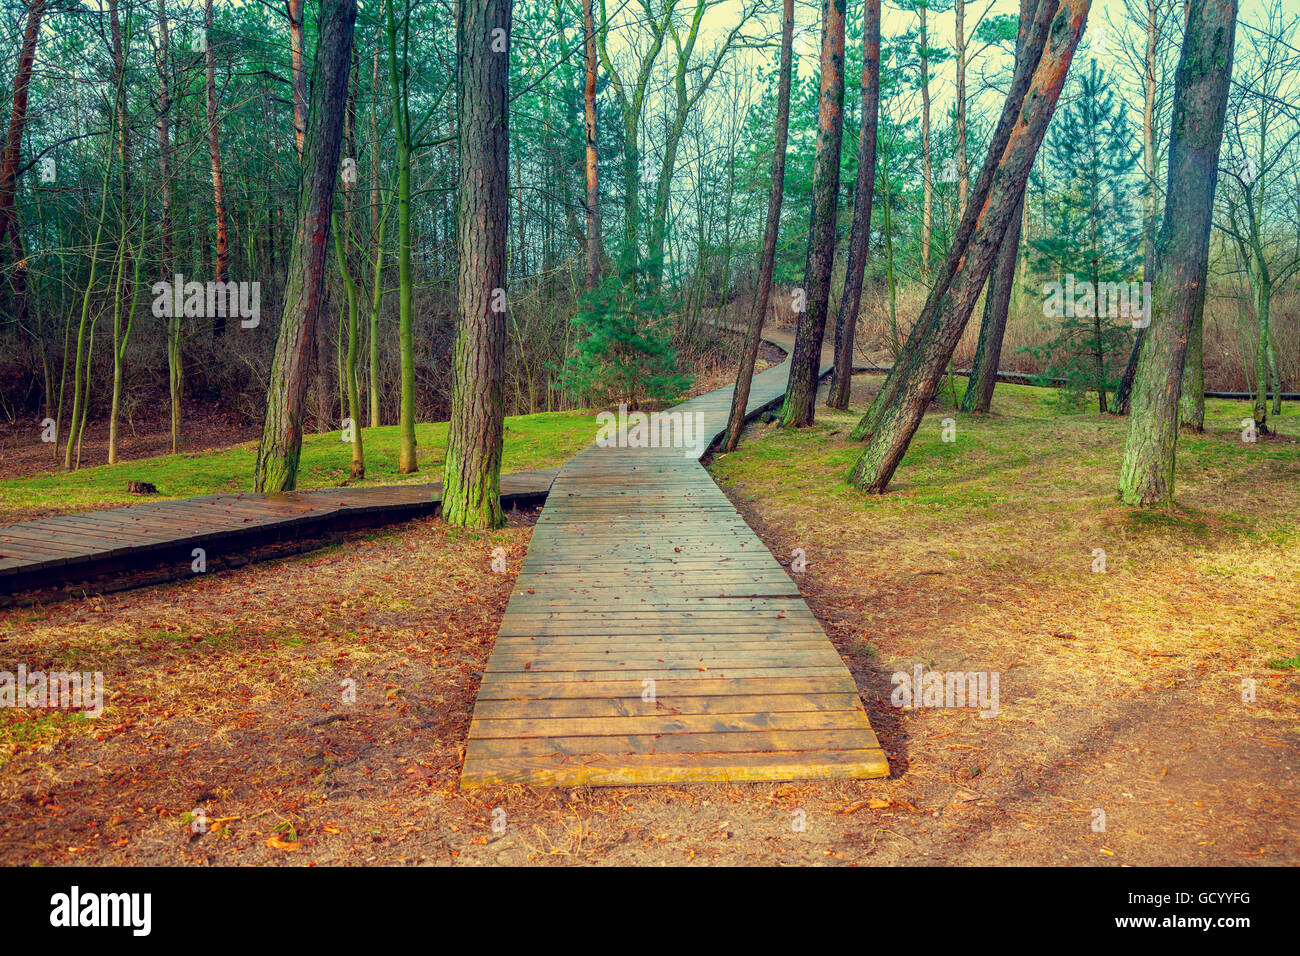 Wooden pathway in the forest after rain Stock Photo